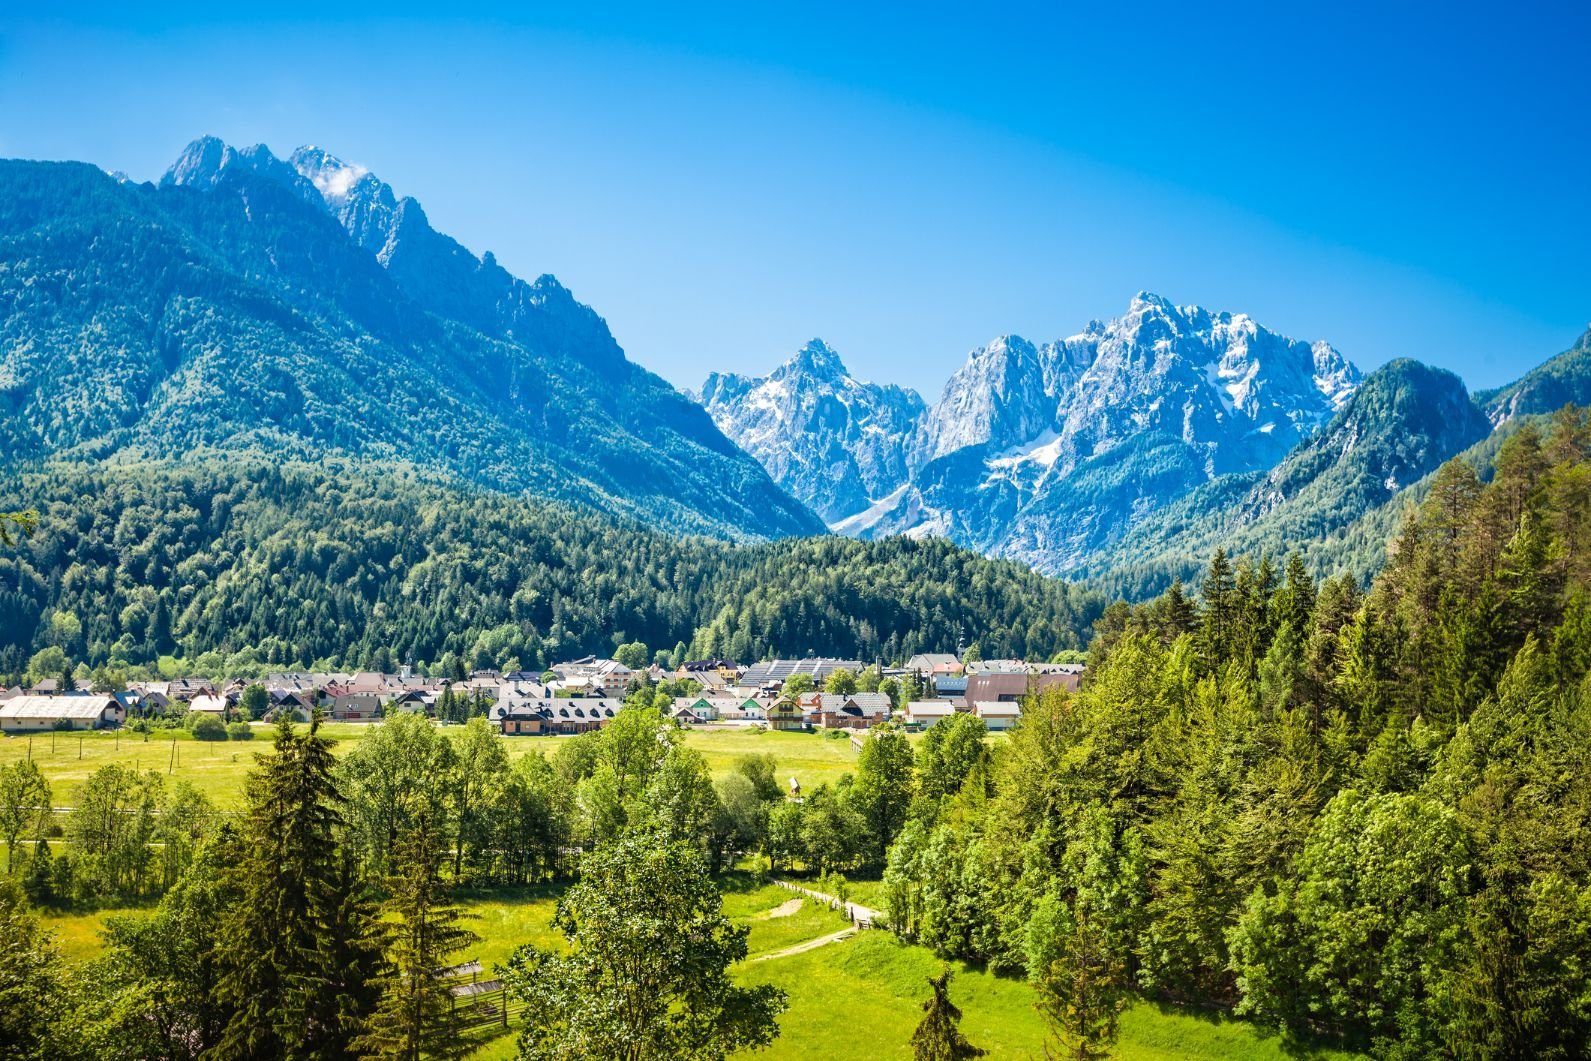 The beautiful town of Kranjska Gora in Slovenia, with the mighty Julian Alps behind